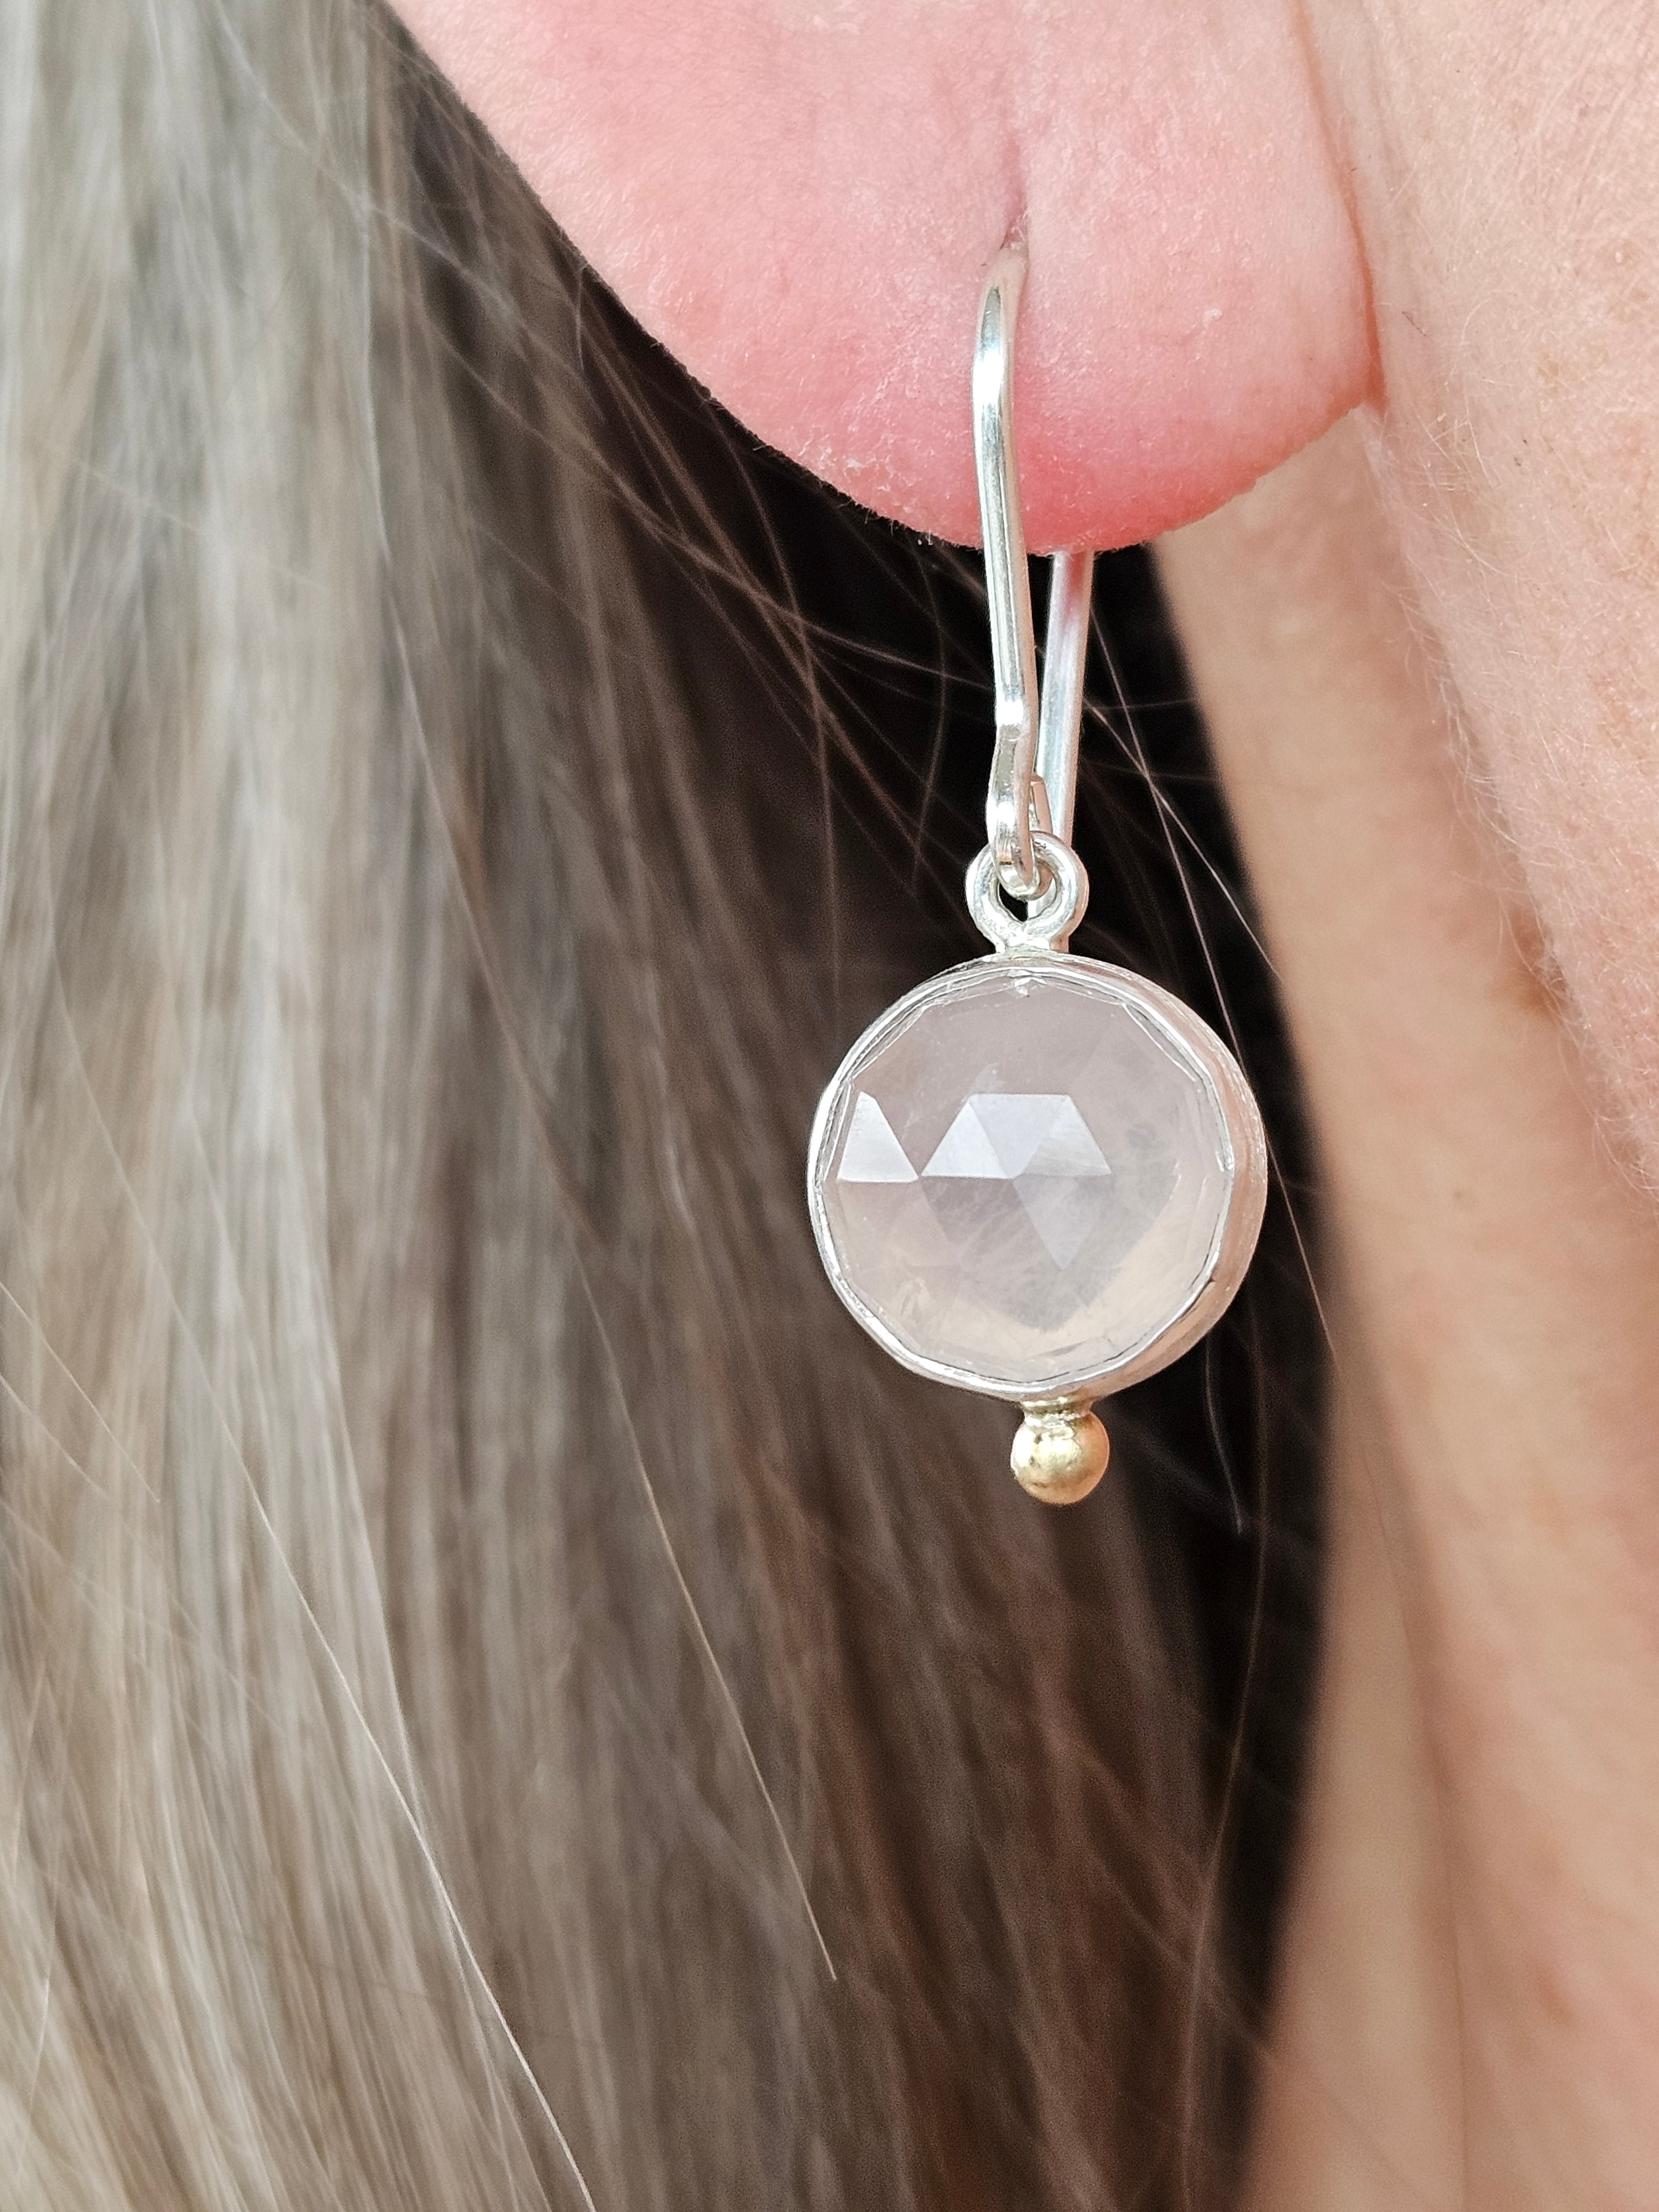 Rose quartz in Sterling silver and 18k gold accents earrings